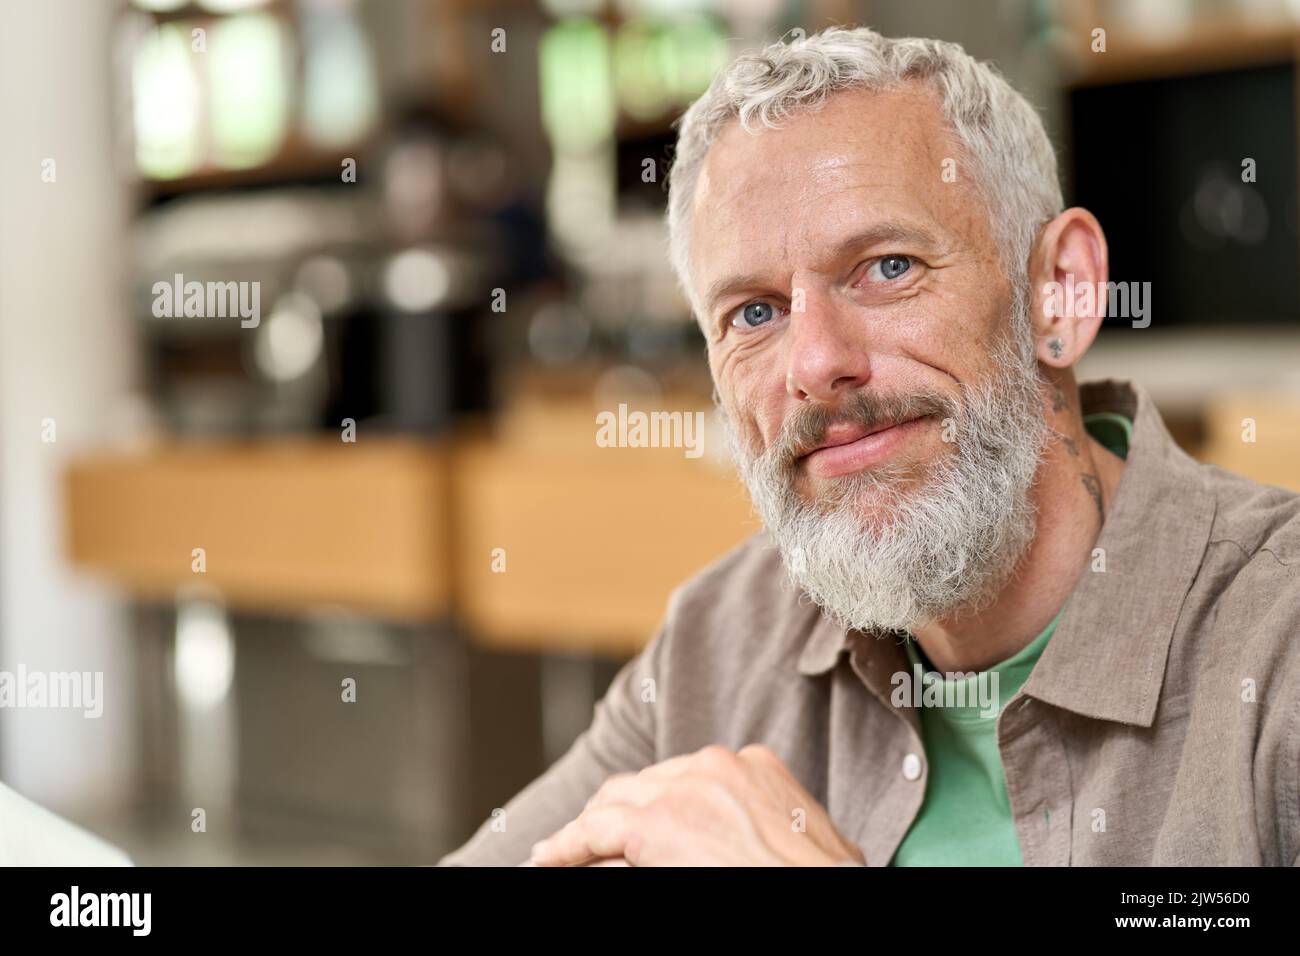 Happy middle aged old gray-haired bearded man close up headshot portrait. Stock Photo